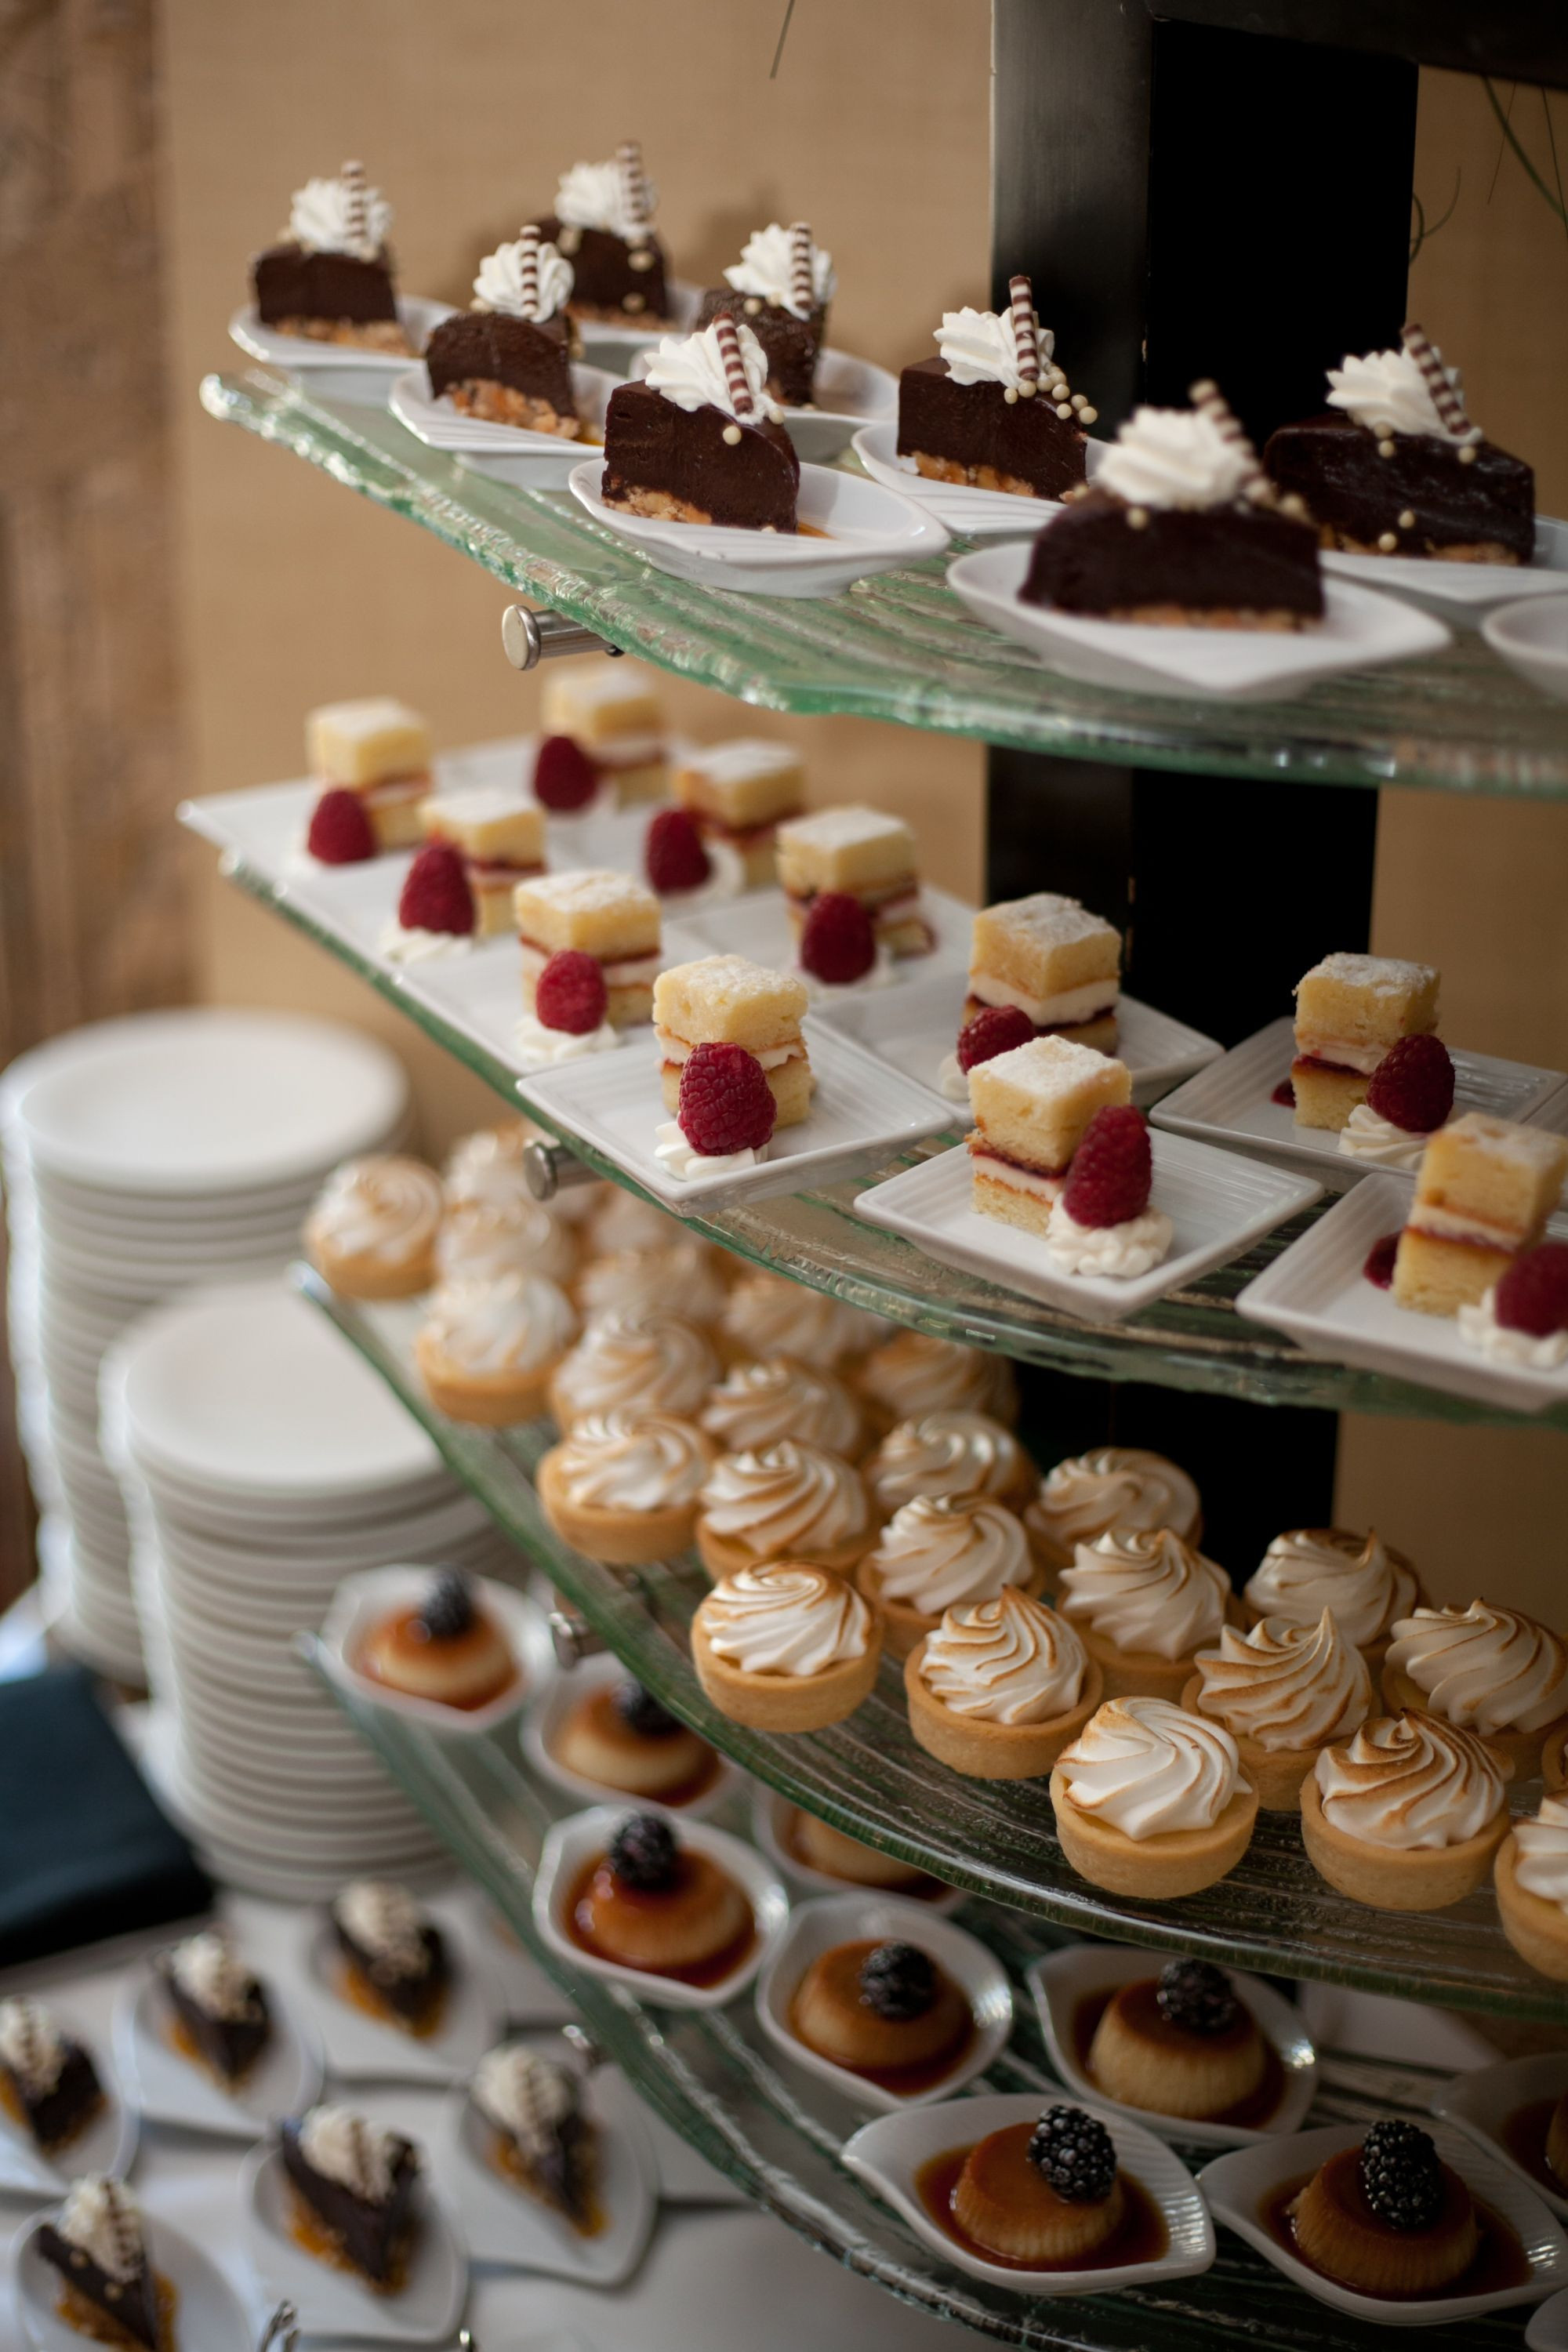 Bite Size Desserts For Weddings
 Have a Bite Sized Dessert Display instead of a Groom s